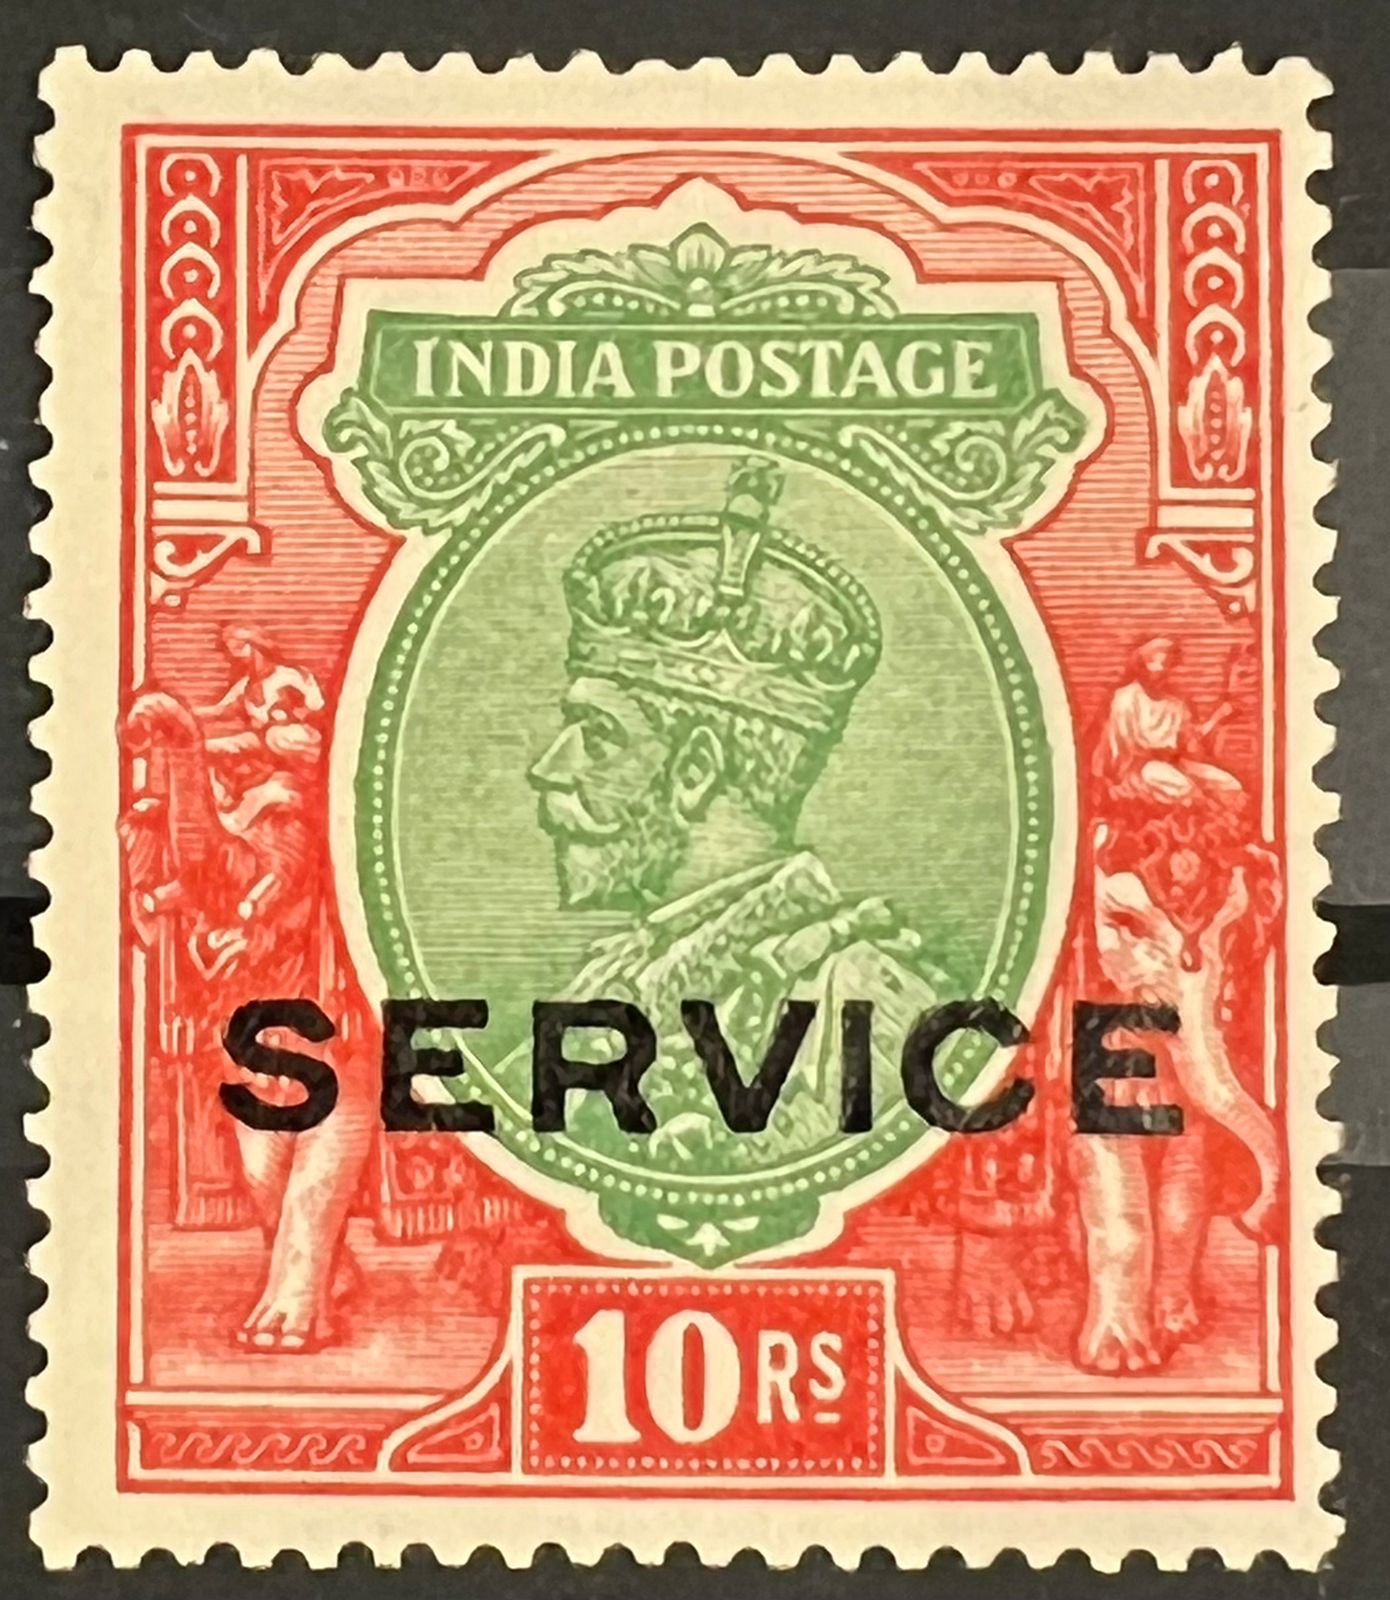 India 1913 KGV Service Single Star Wmk 10Rs ESSAY  " Shiny Ink Overprint " without Gum as issued Rare